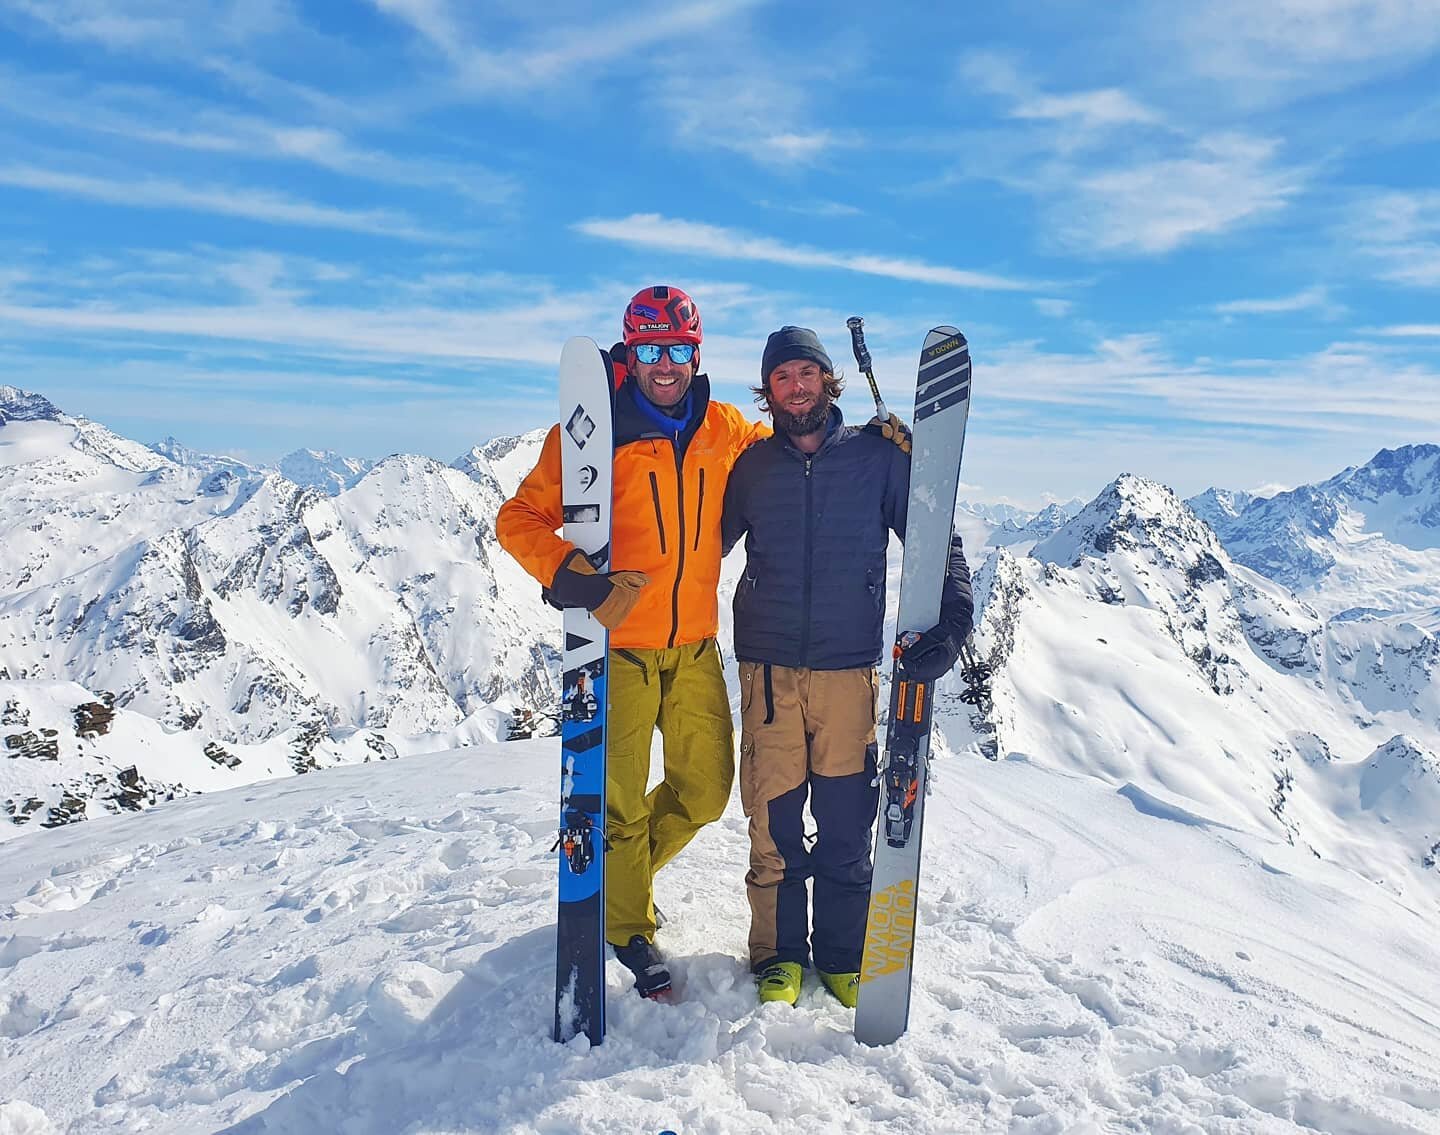 That's the Job Meeting we like ❄🤟🏔
.
Planning next season details with skipper @giuliostagi during a nice climb and ski day in Swiss mountains!
.
#ski #engadin #powder #stmoritz #theactioncruise